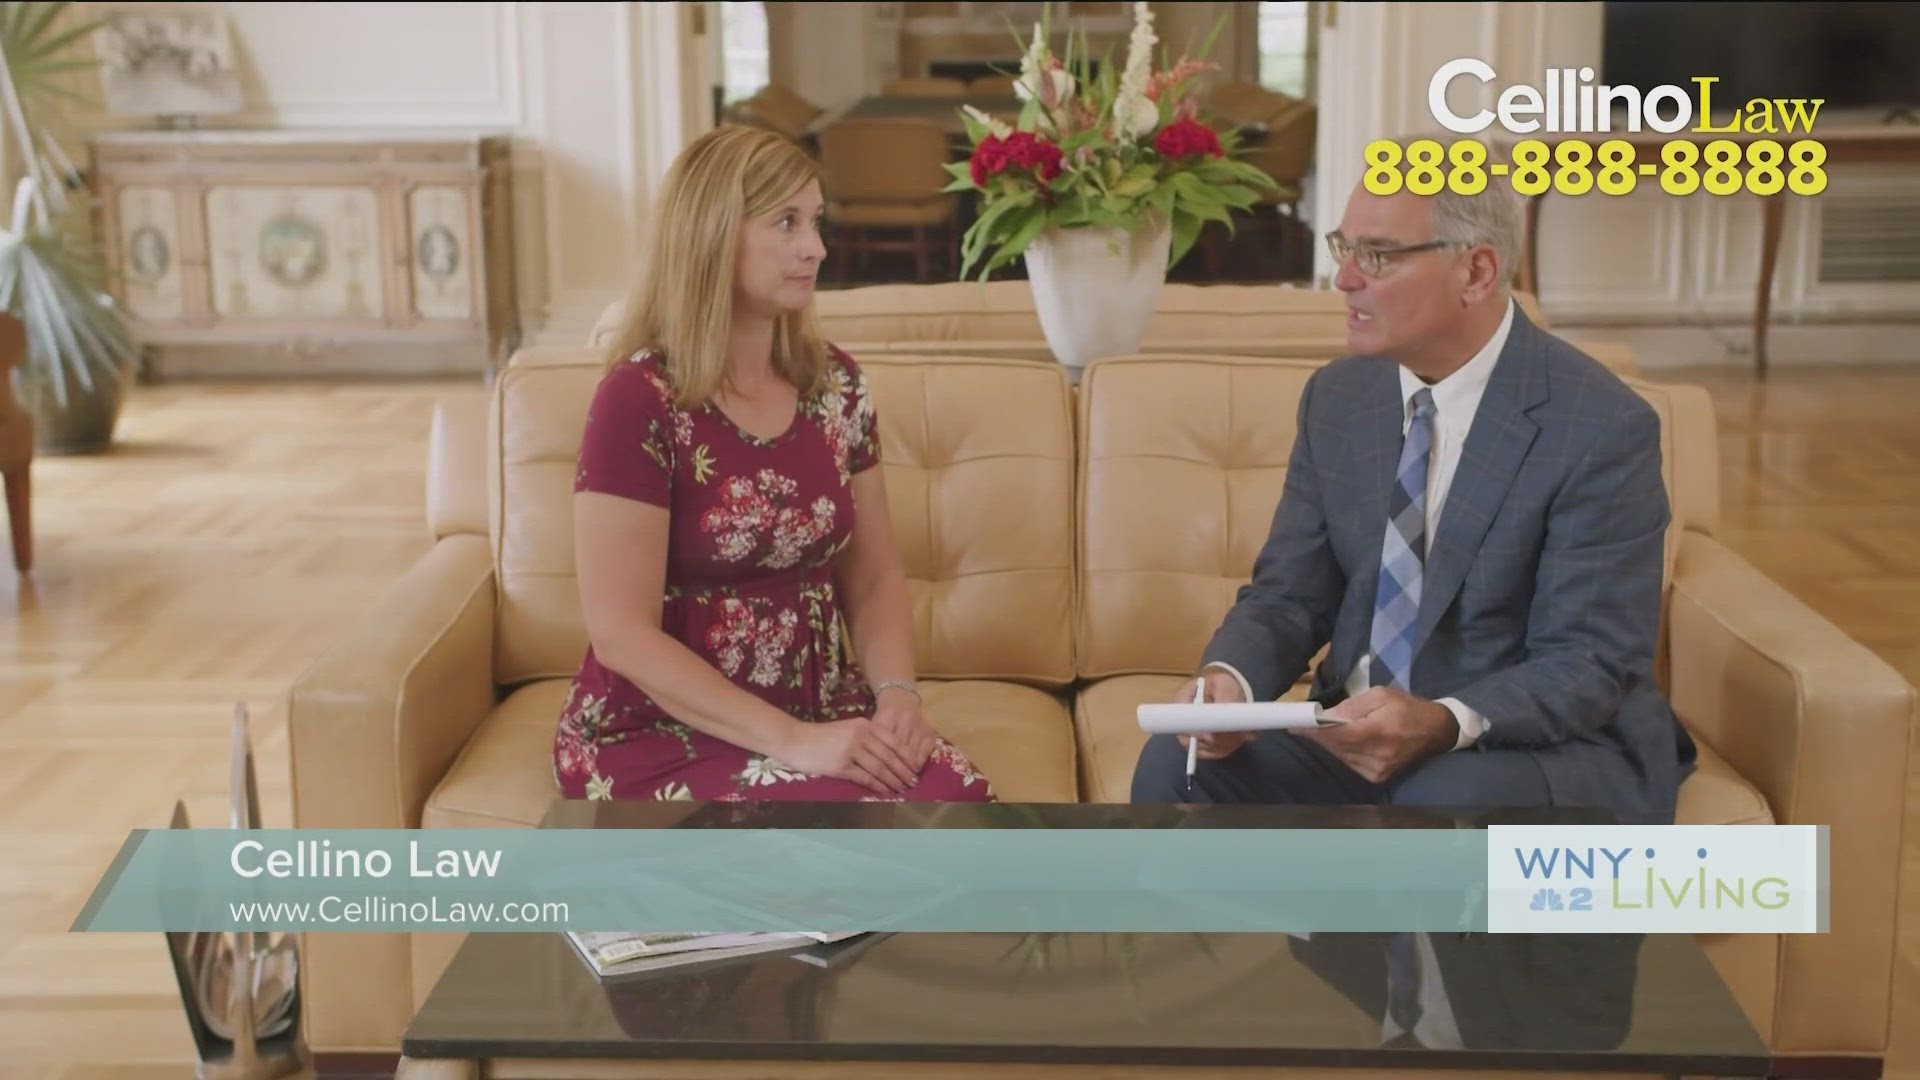 WNY Living - April 13th- Cellino Law (THIS VIDEO IS SPONSORED BY CELLINO LAW)